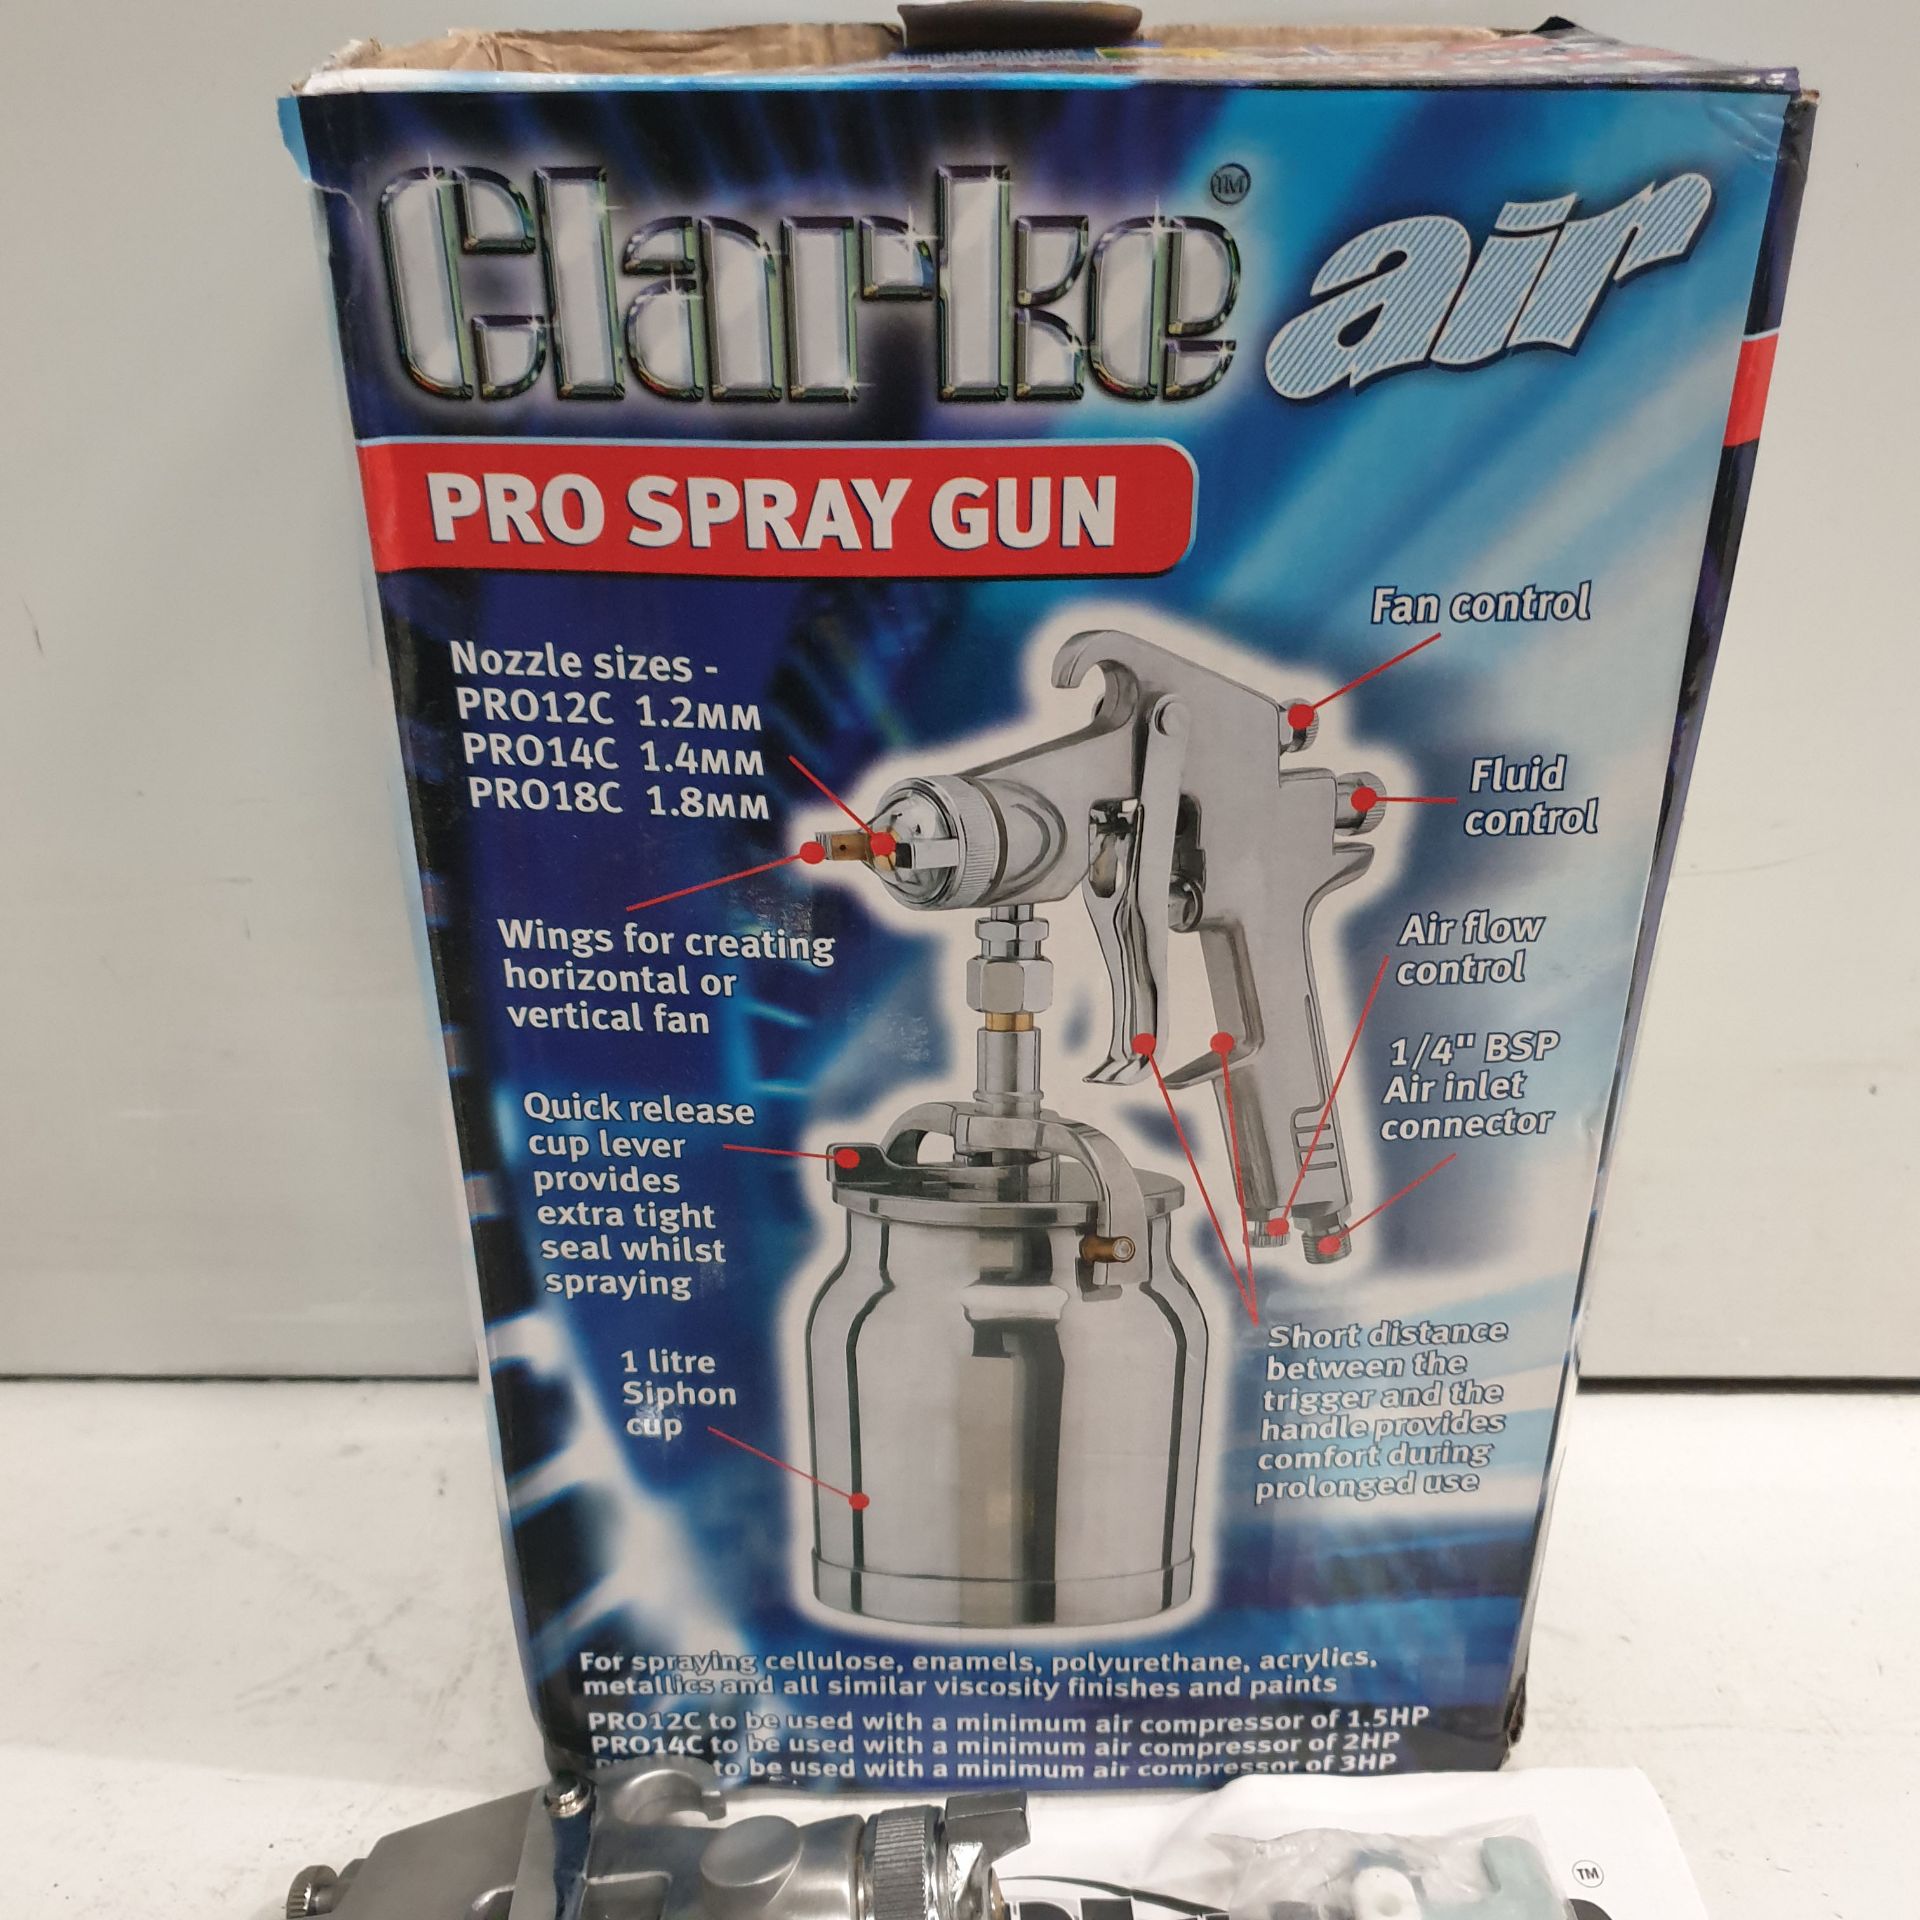 Clarke Air Pro Spray Gun with Fluid & Fan Control and Quick Release Siphon Cup. - Image 2 of 3